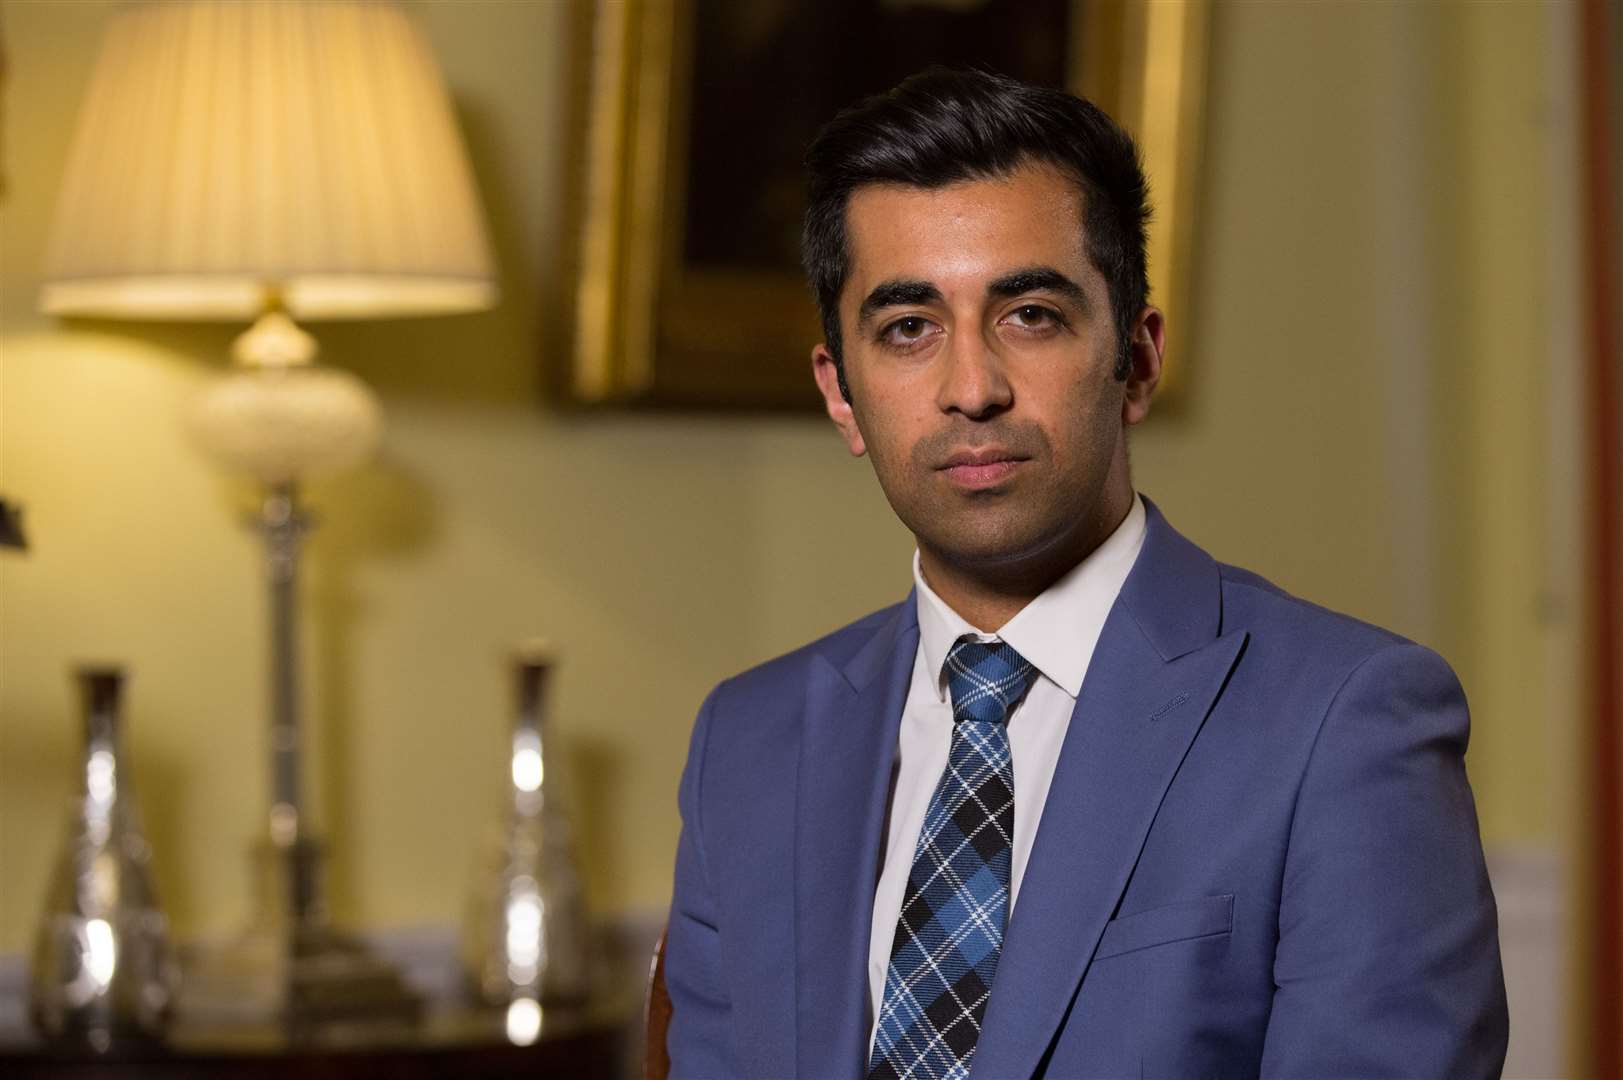 Justice secretary Humza Yousaf said he was encouraged by the high levels of compliance around the country.